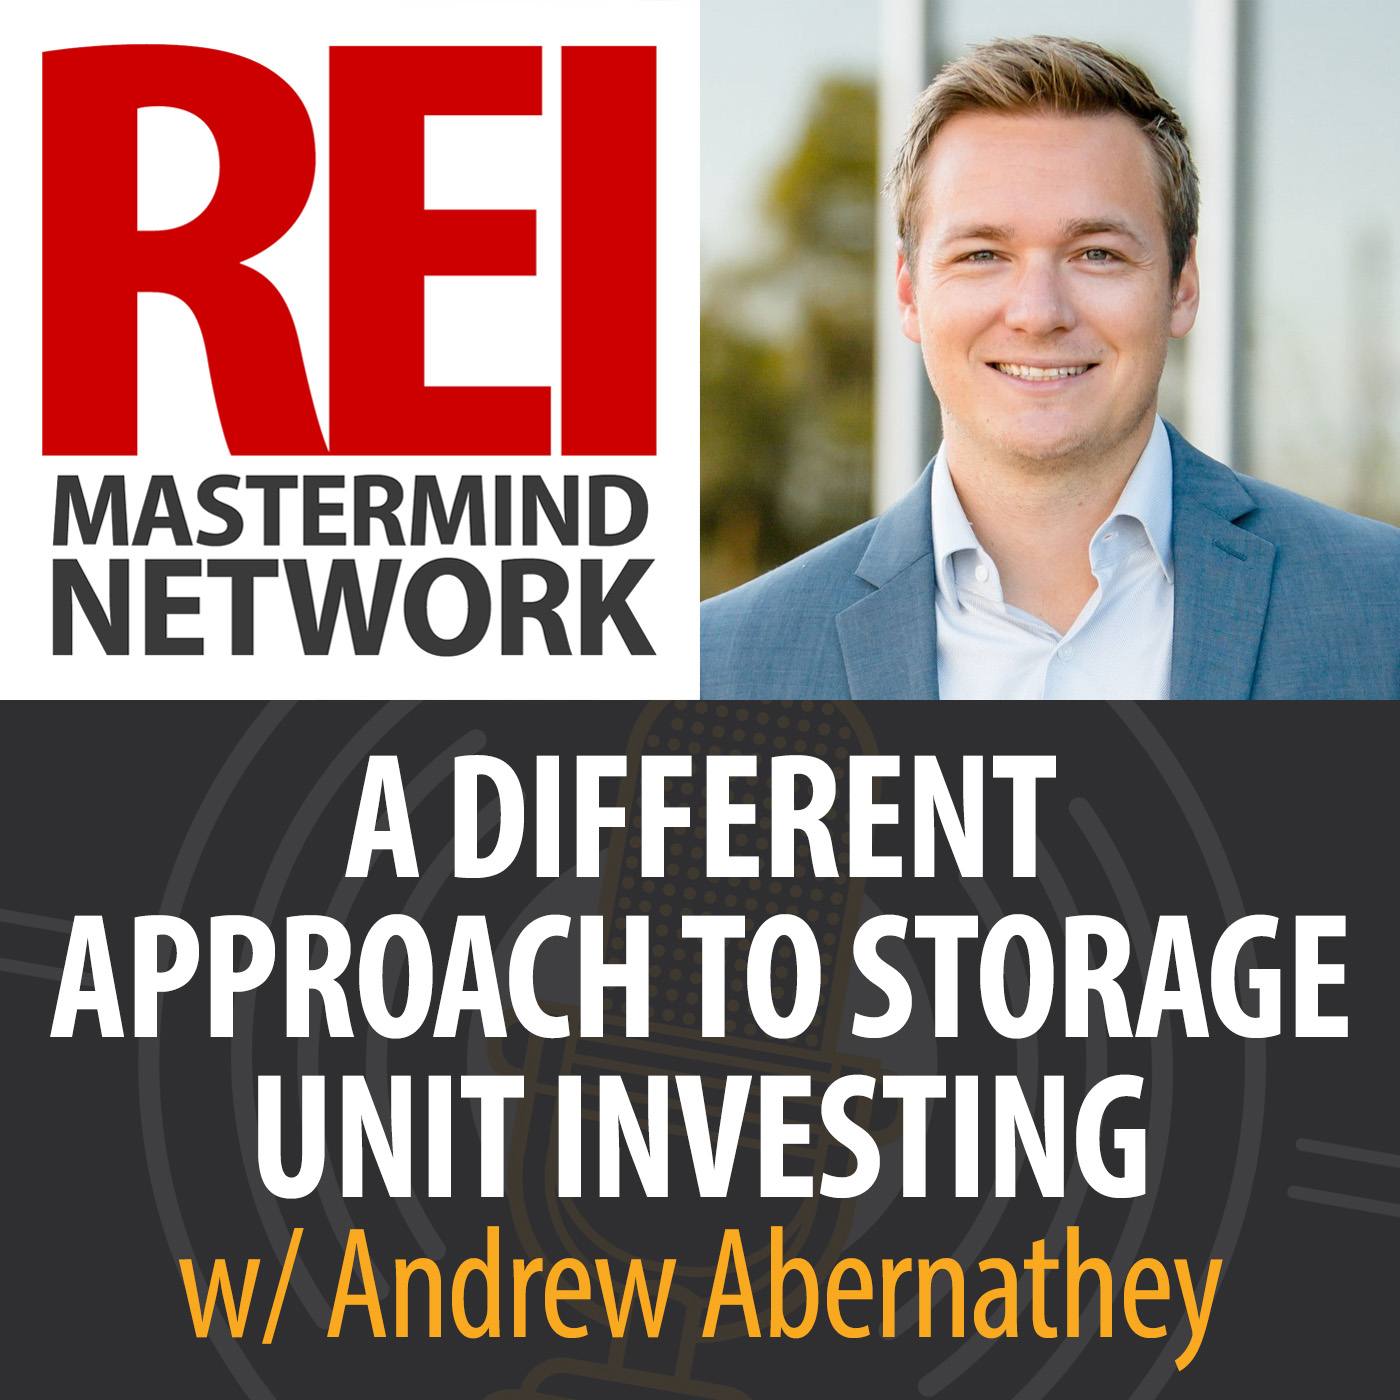 A Different Approach to Storage Unit Investing with Andrew Abernathey